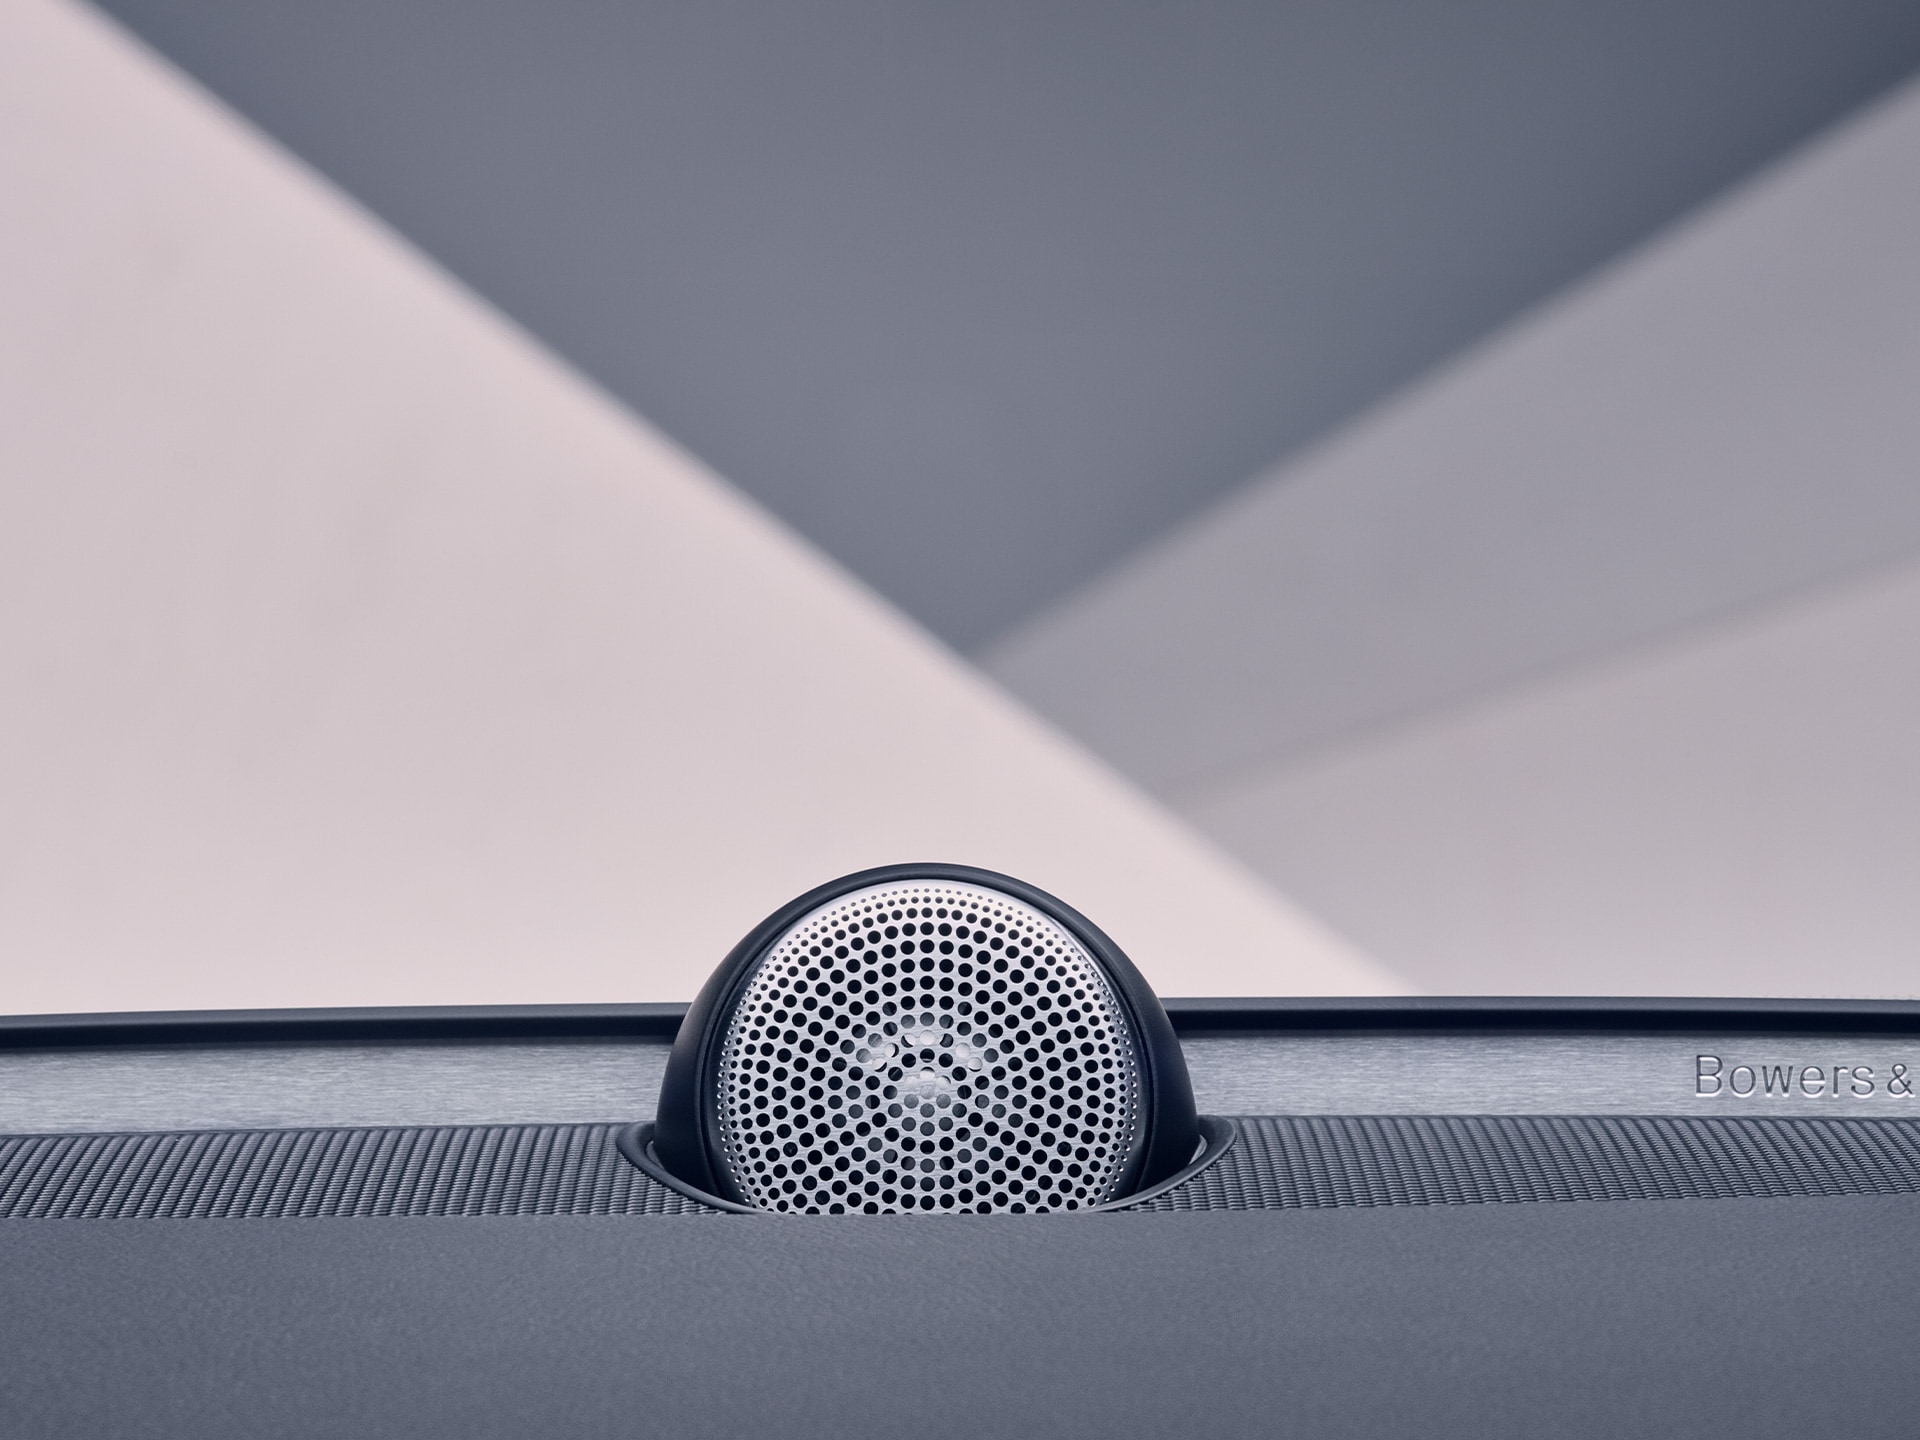 Bowers & Wilkins speakers inside a Volvo V90 Cross Country.